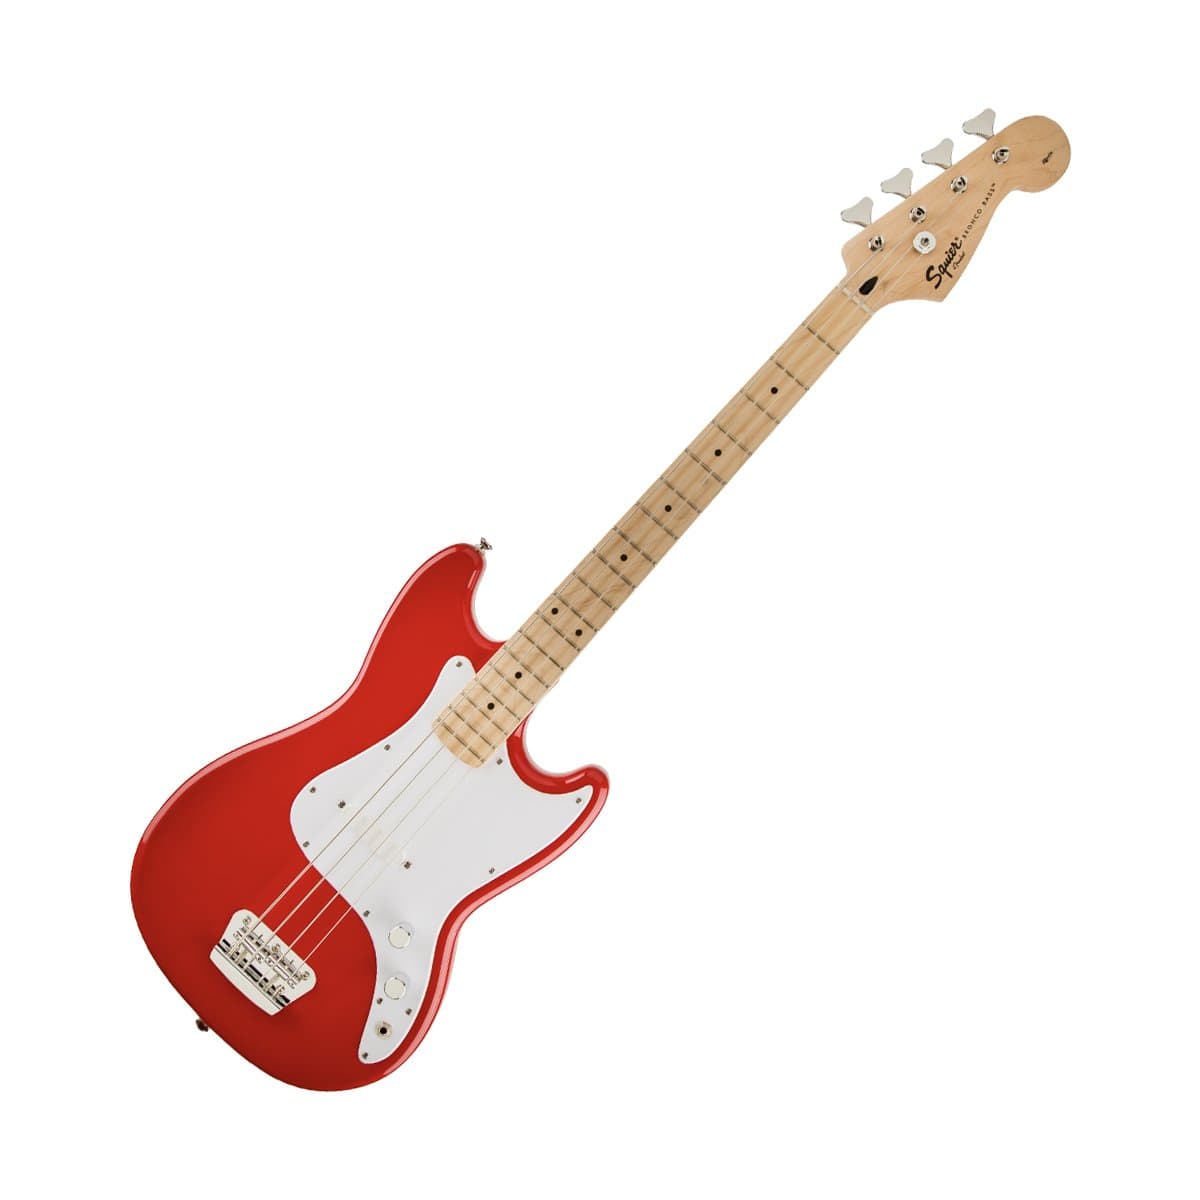 Squier Guitar Fender Squier Bronco Short Scale Bass Torino Red - Byron Music